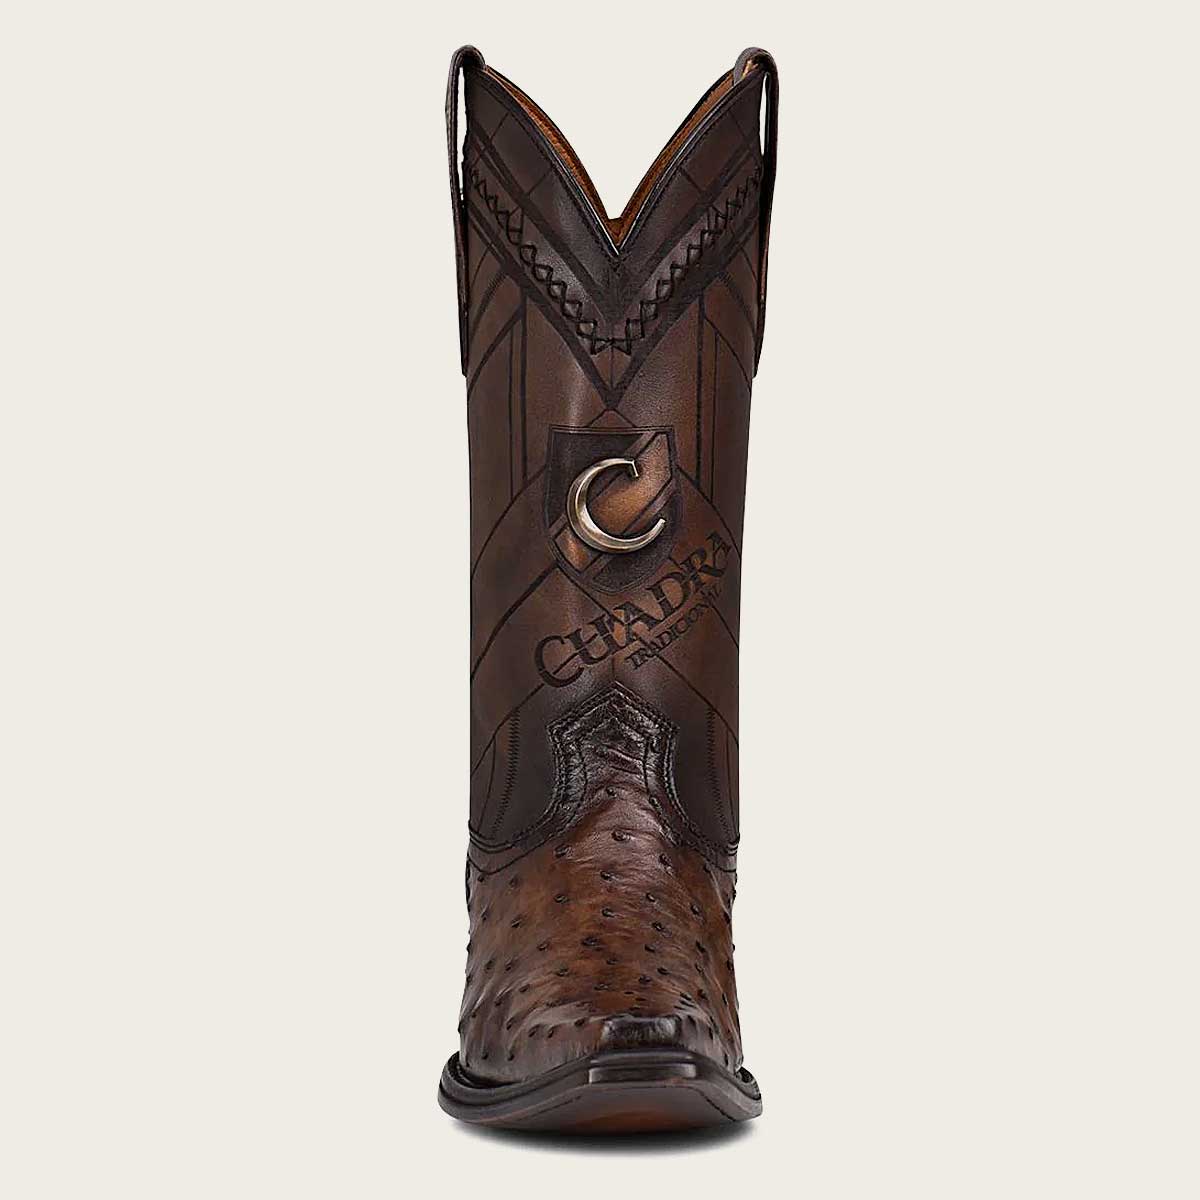 Crafted from high-quality ostrich leather, these boots feature a distinct wide feather pattern, enhancing their exclusive and luxurious appeal